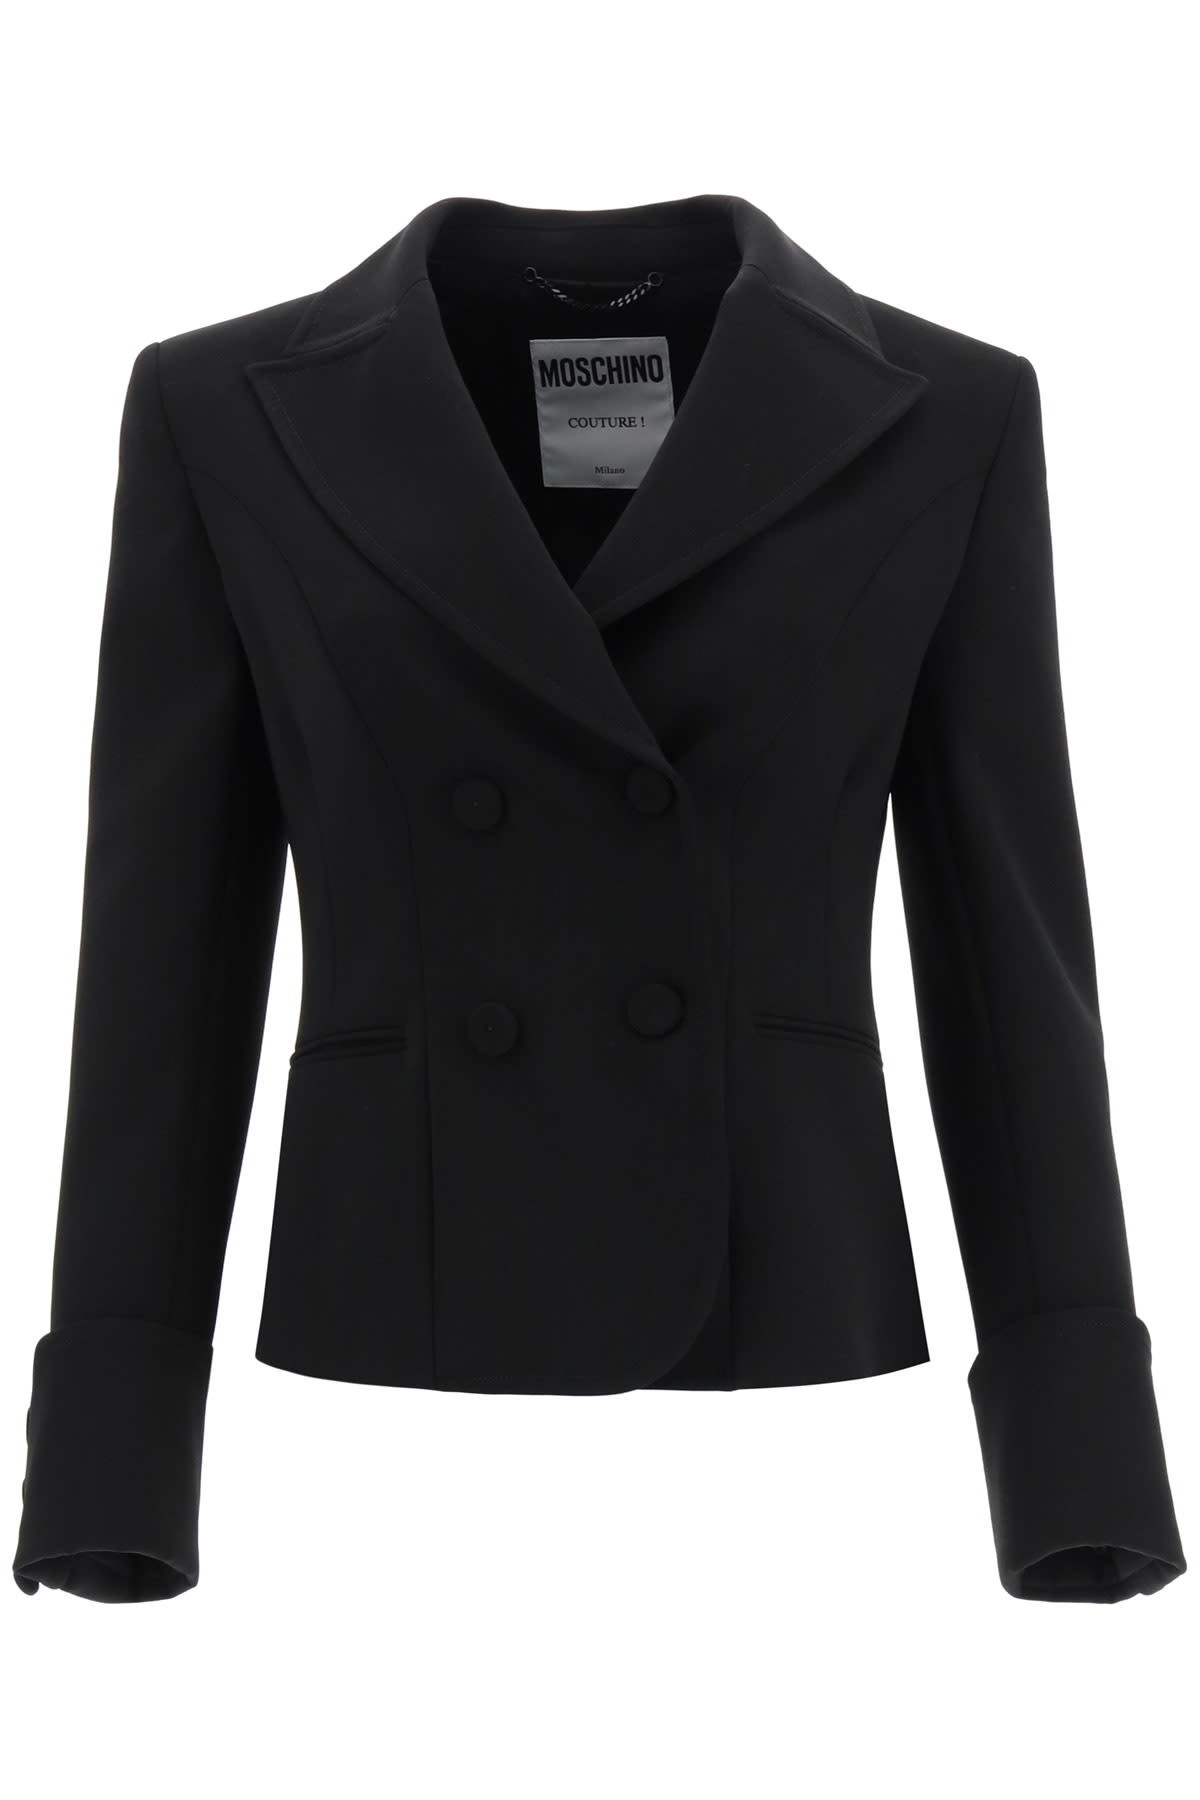 Moschino Double Breasted Crepe Blazer